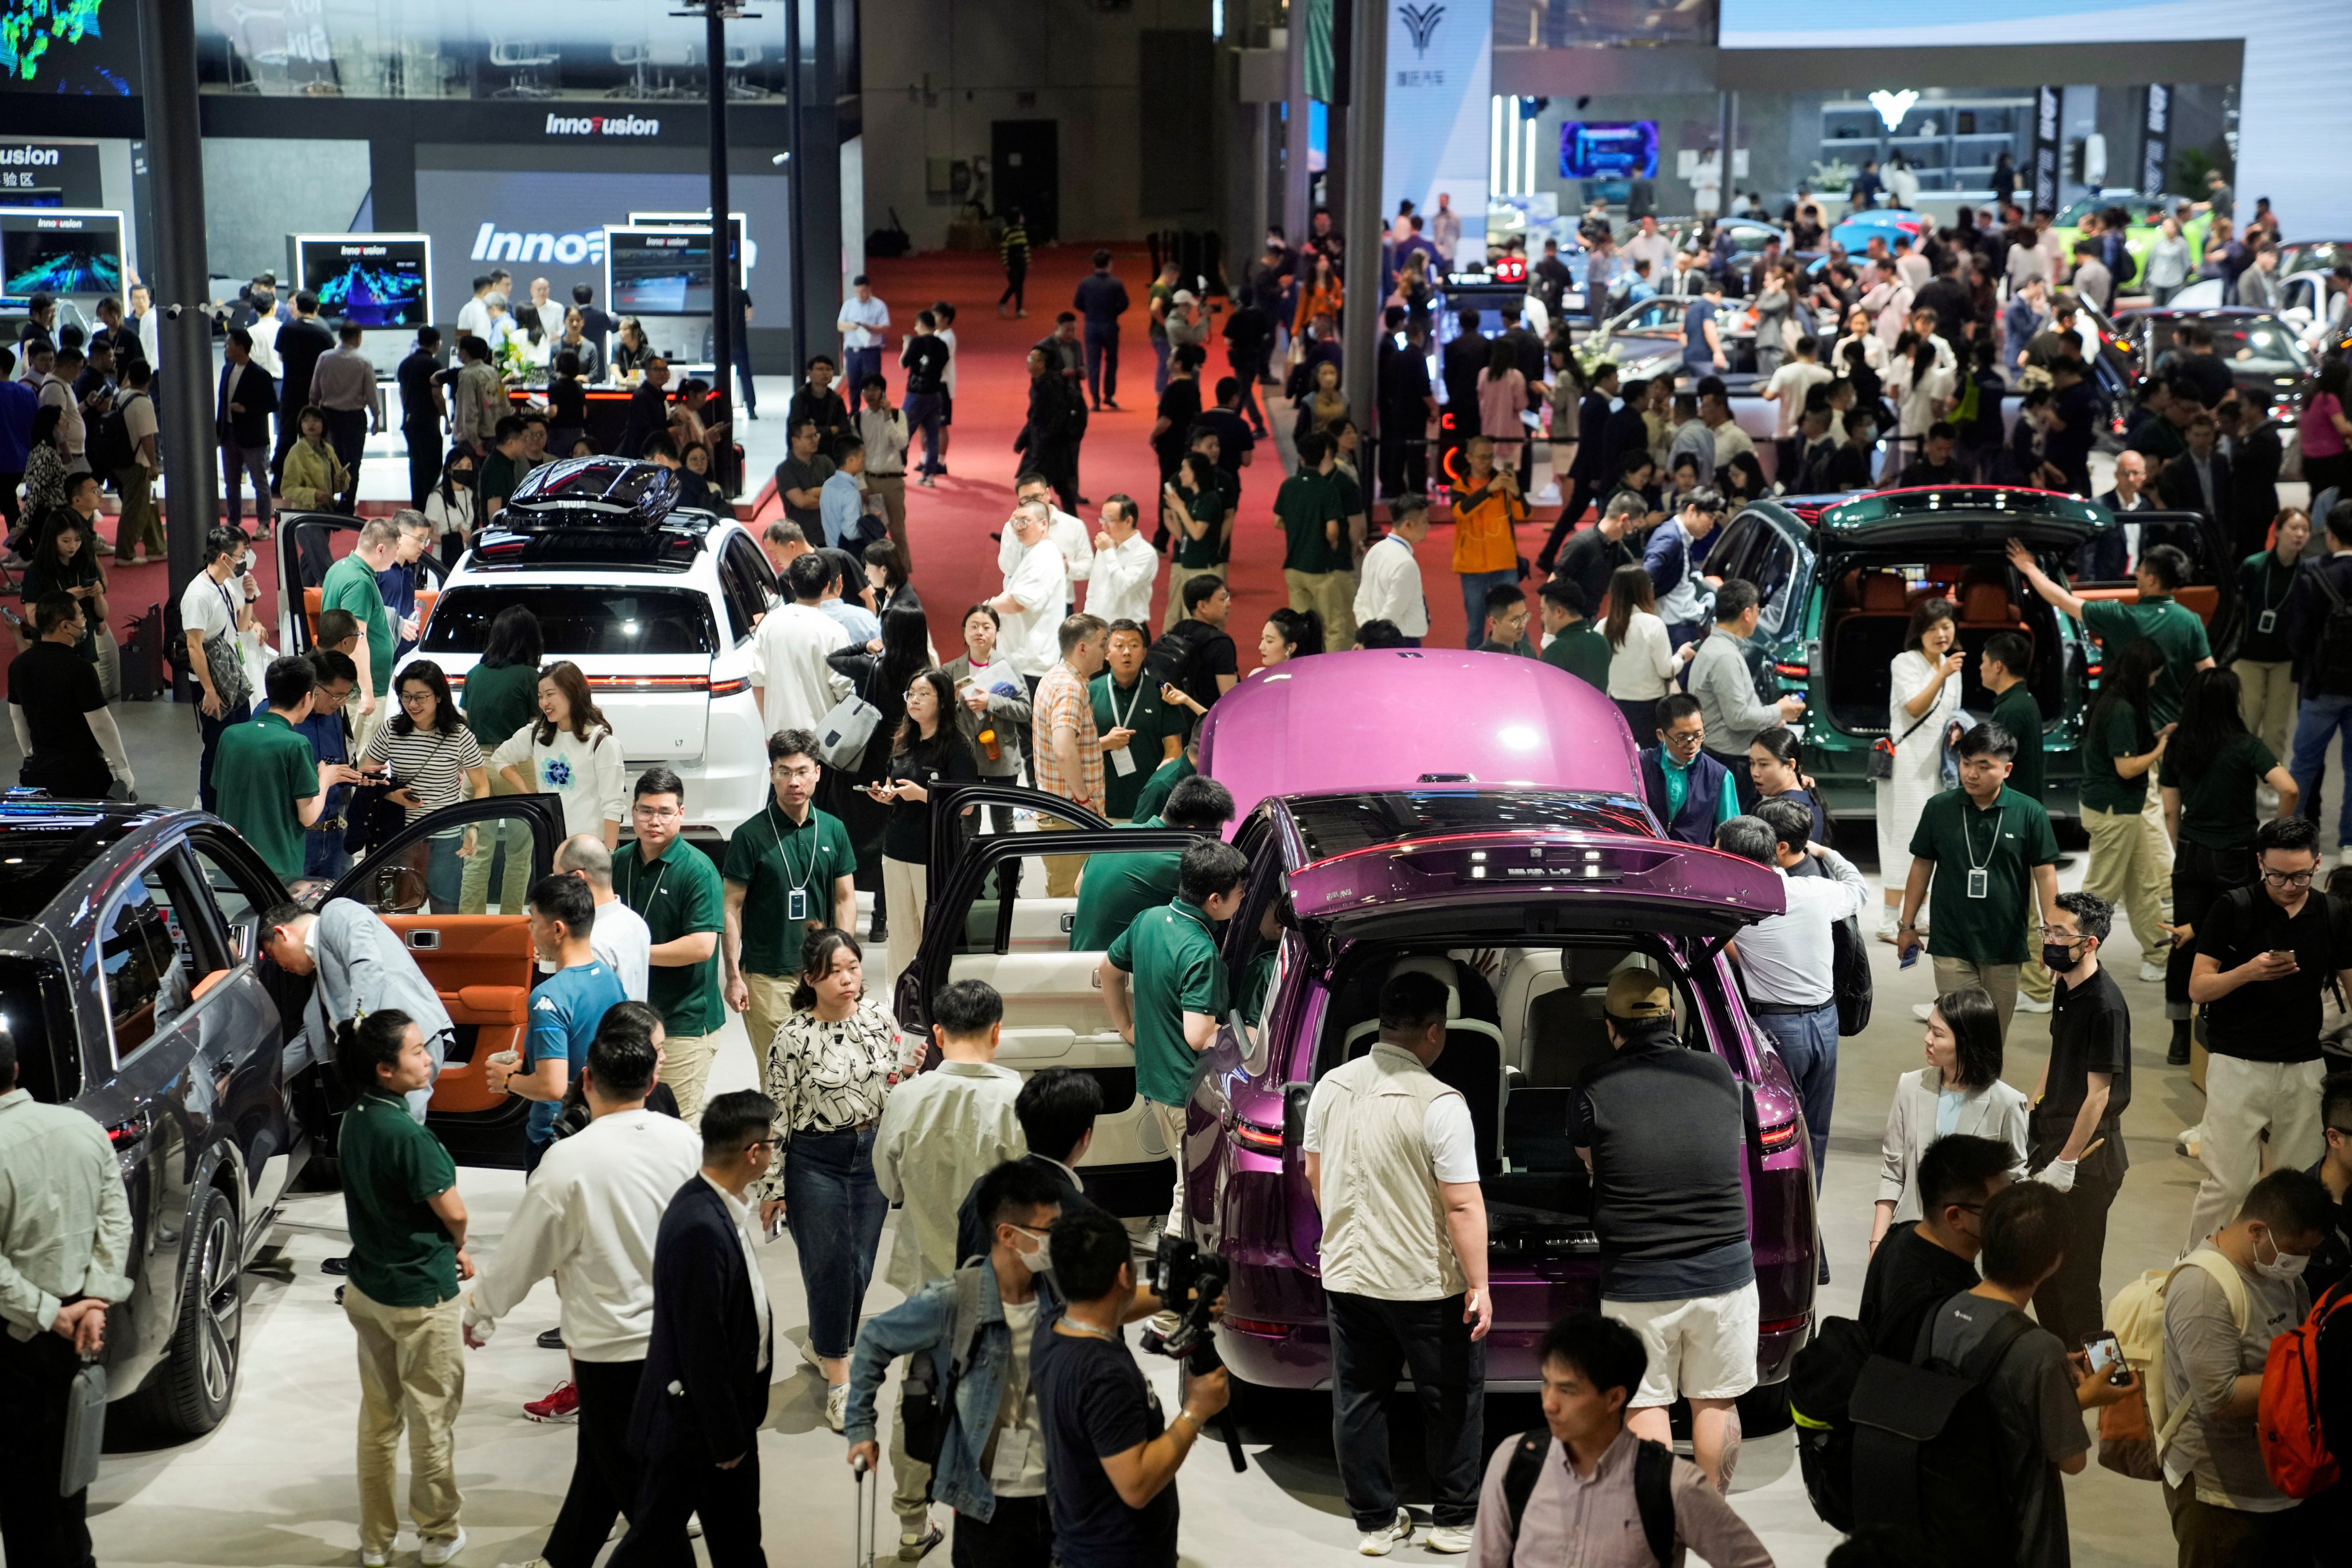 The Shanghai Auto Show, which runs until April 27, has drawn over 1,000 exhibitors from within China and overseas. Photo: Reuters